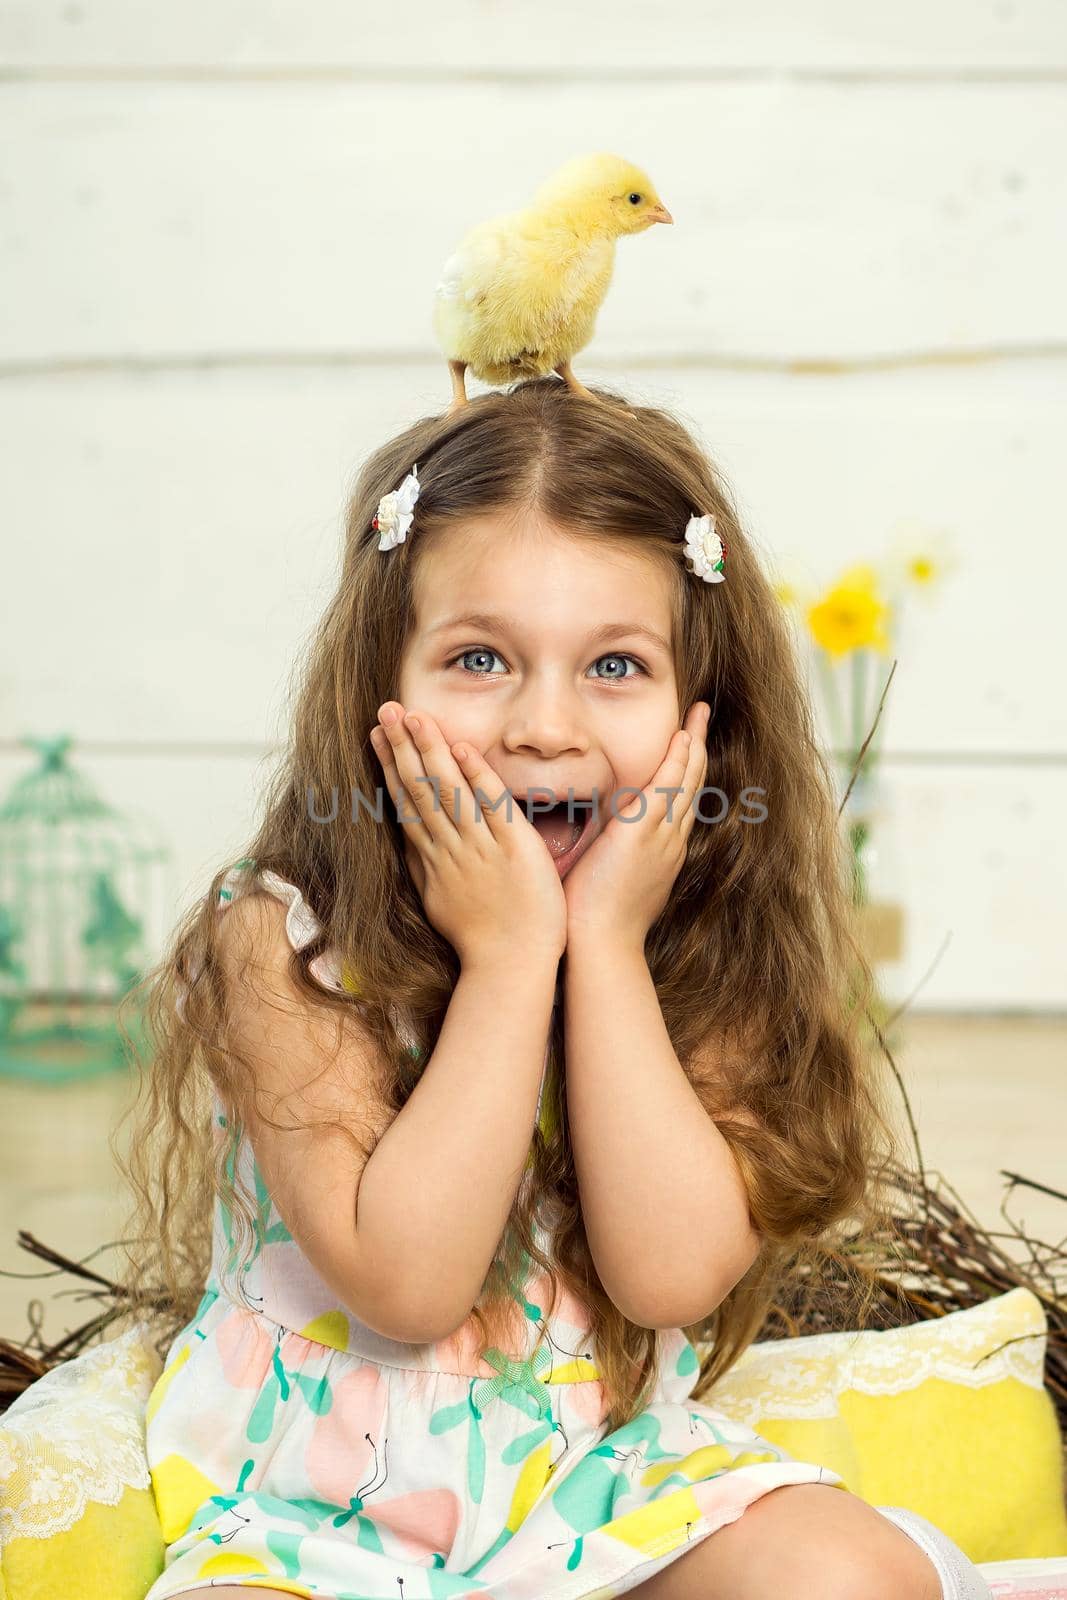 A scared little girl has a cute fluffy Easter chicken on her head.